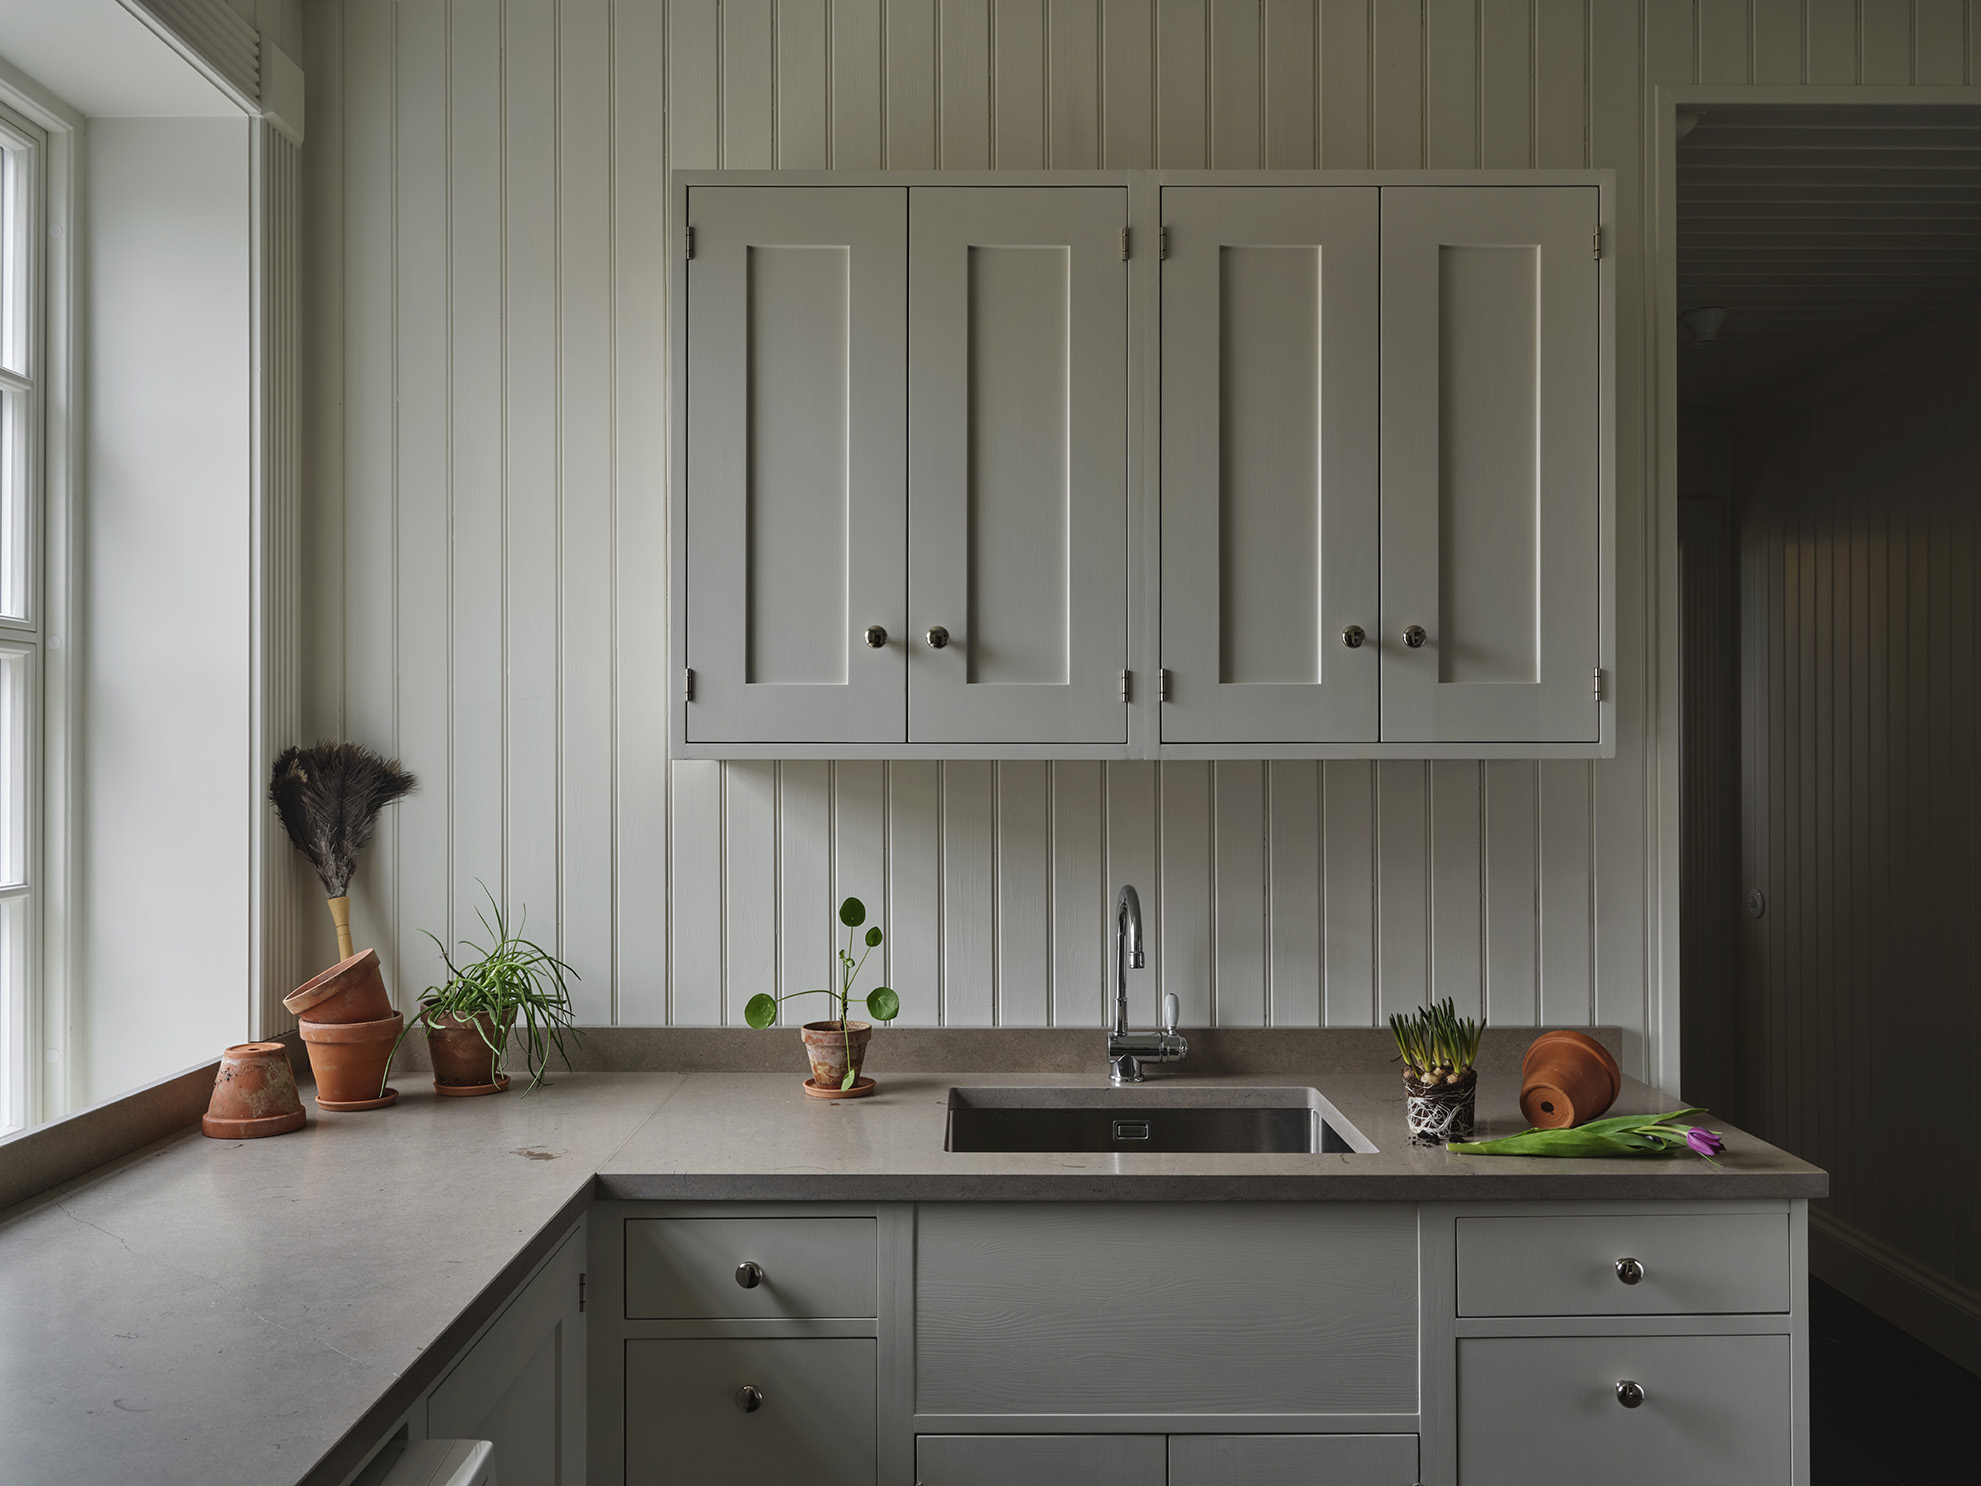 Cupboards & Goods – A new way to design your dream kitchen